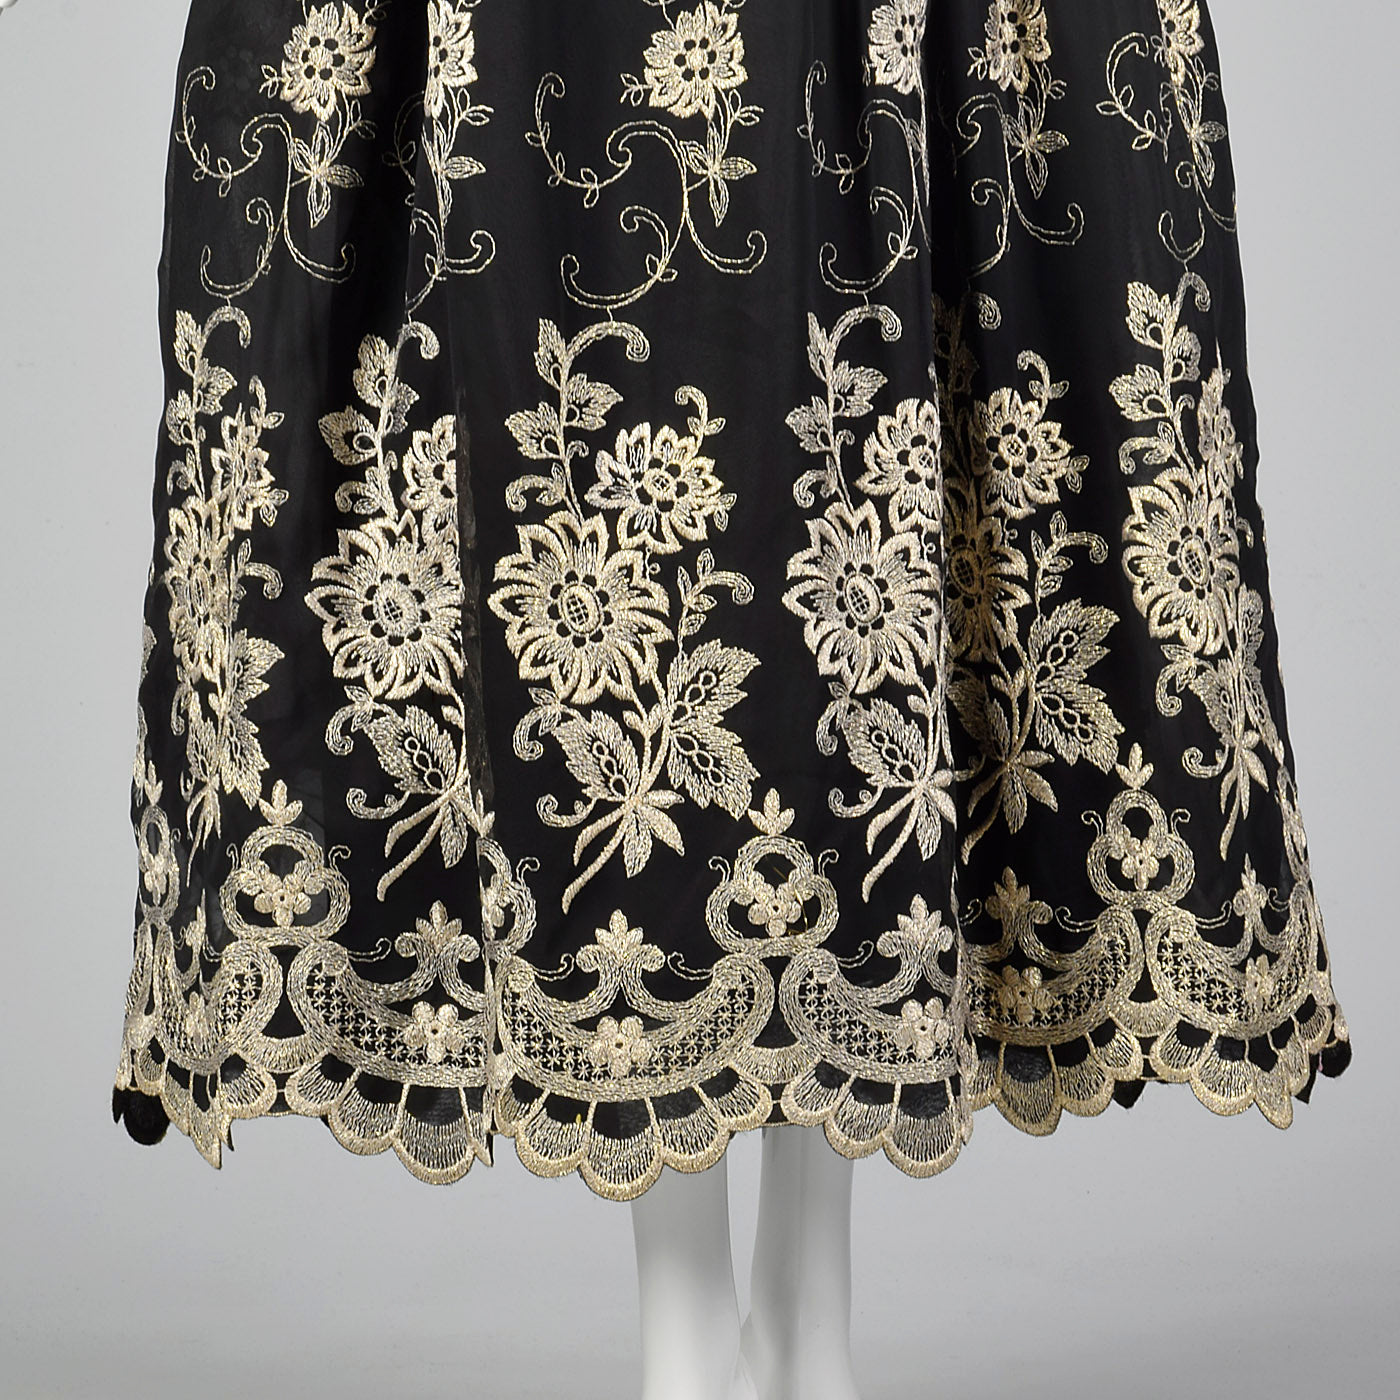 1980s Mr. Blackwell Evening Dress with Gold Embroidery